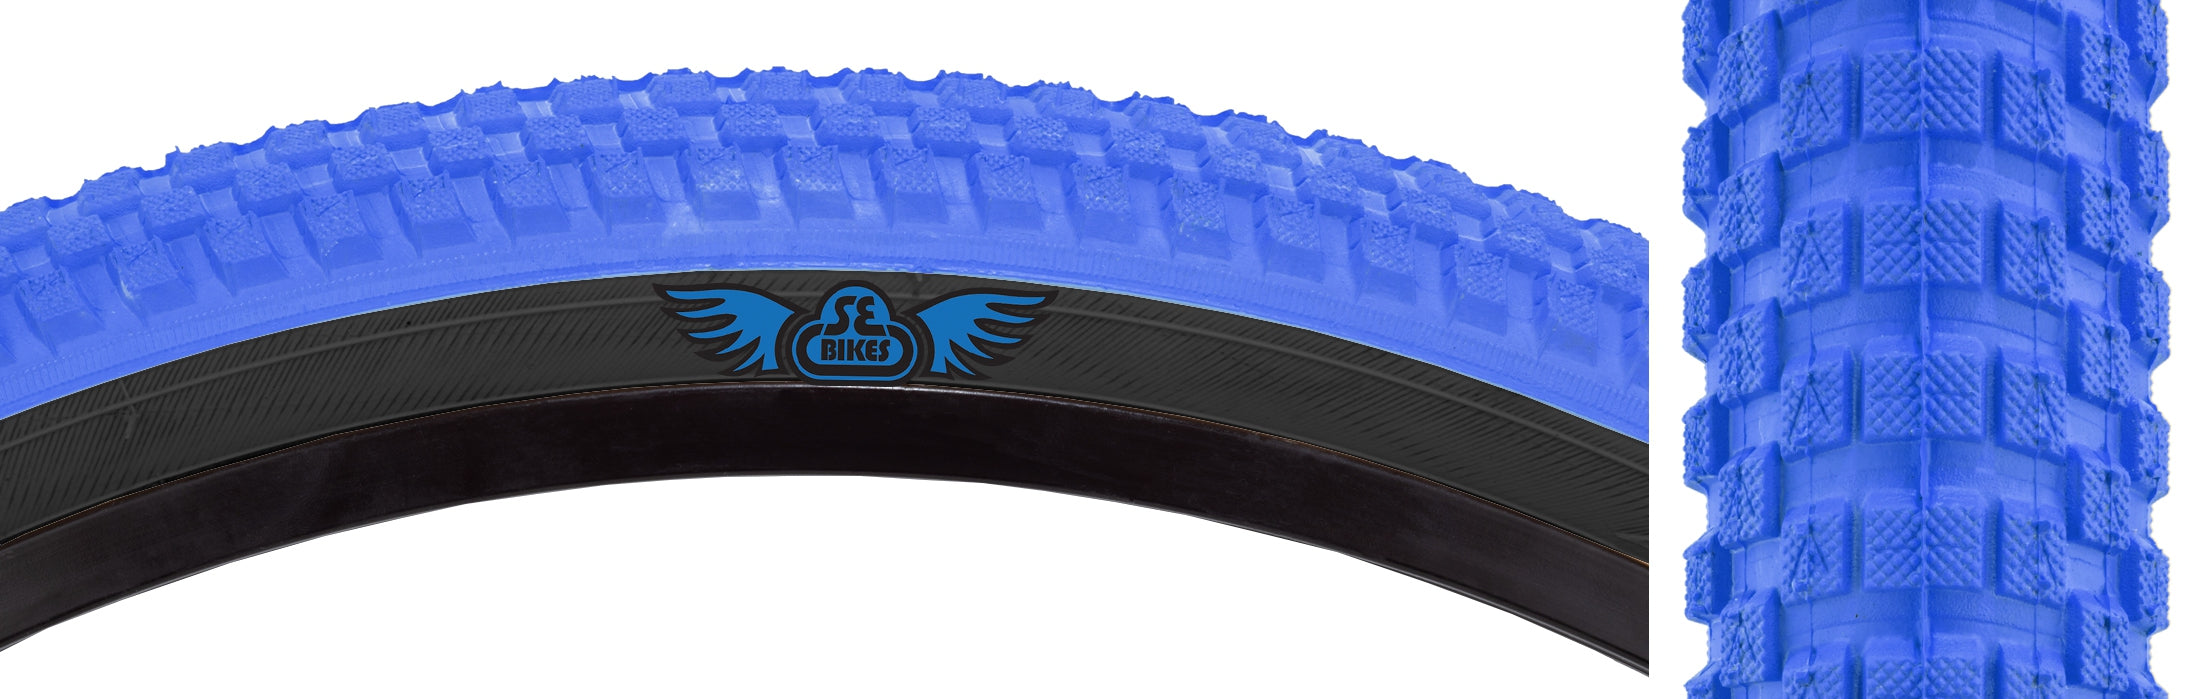 side view of se cub tire in blue black